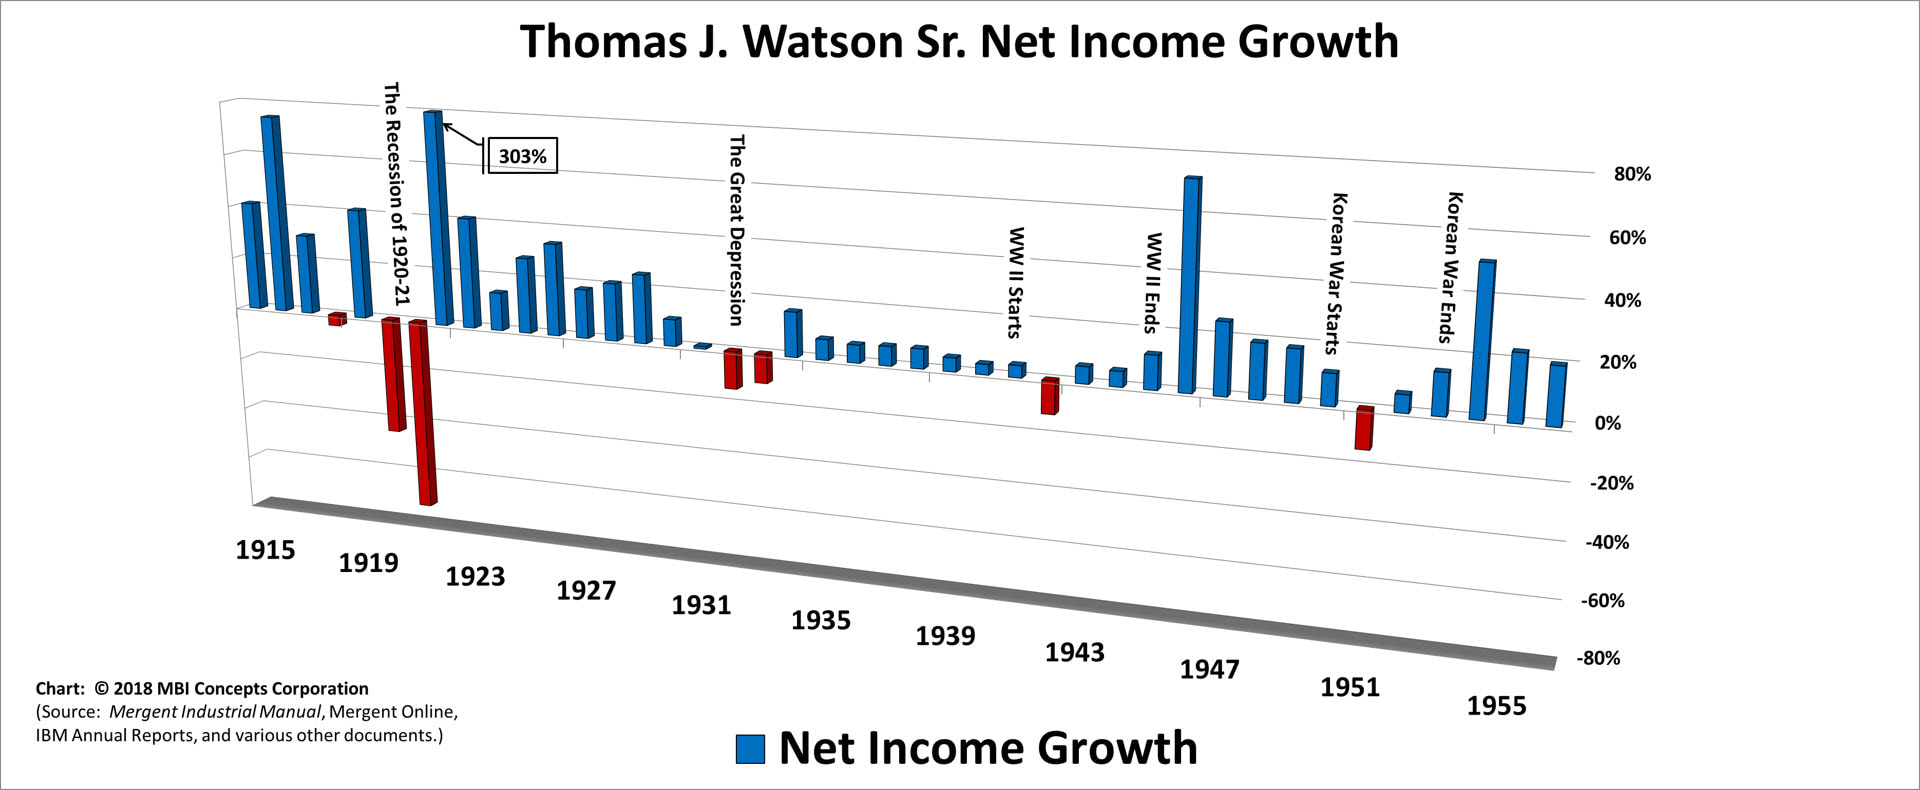 A color bar chart showing IBM's net income (profit) growth from 1915 to 1955 for Thomas J. Watson Sr.